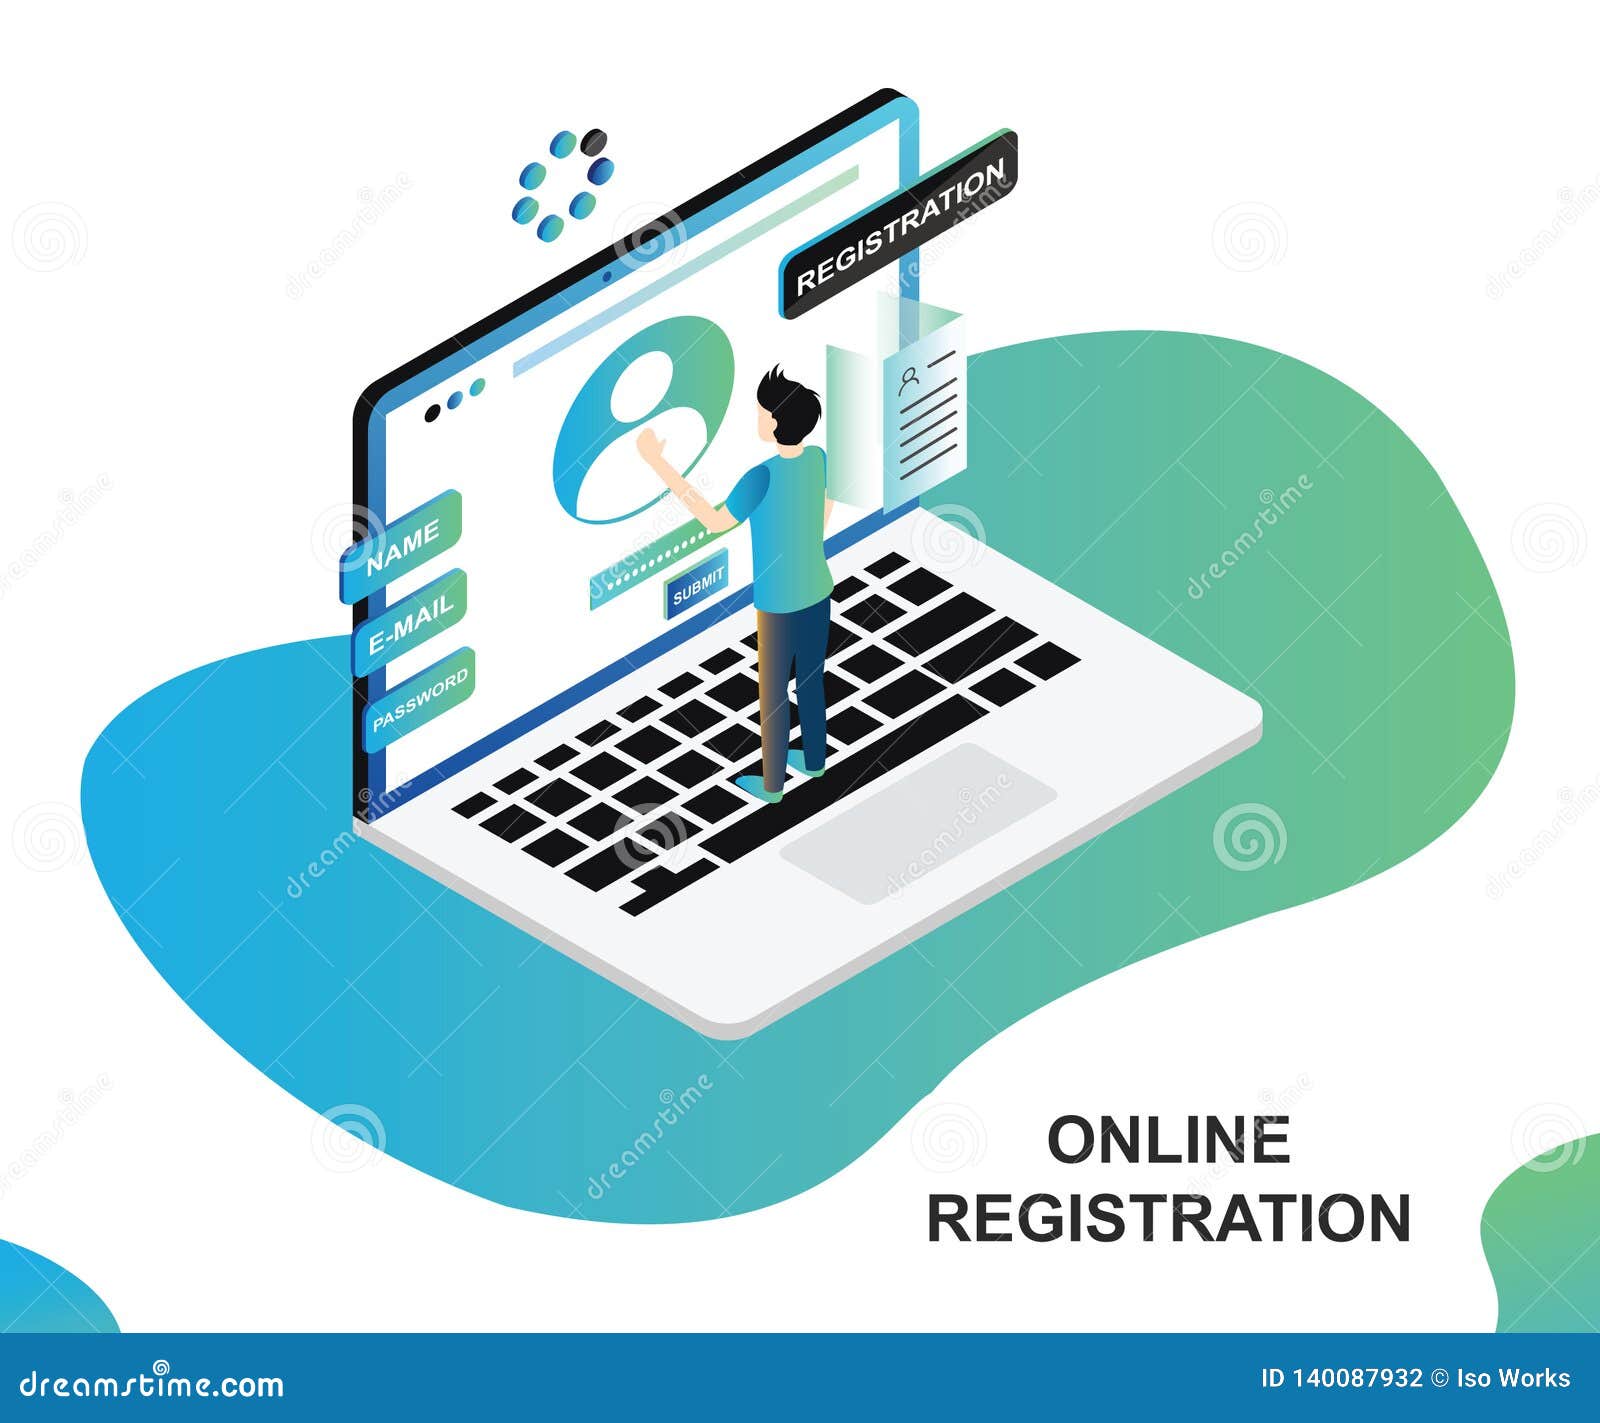 isometric artwork concept of a man using online registration process.